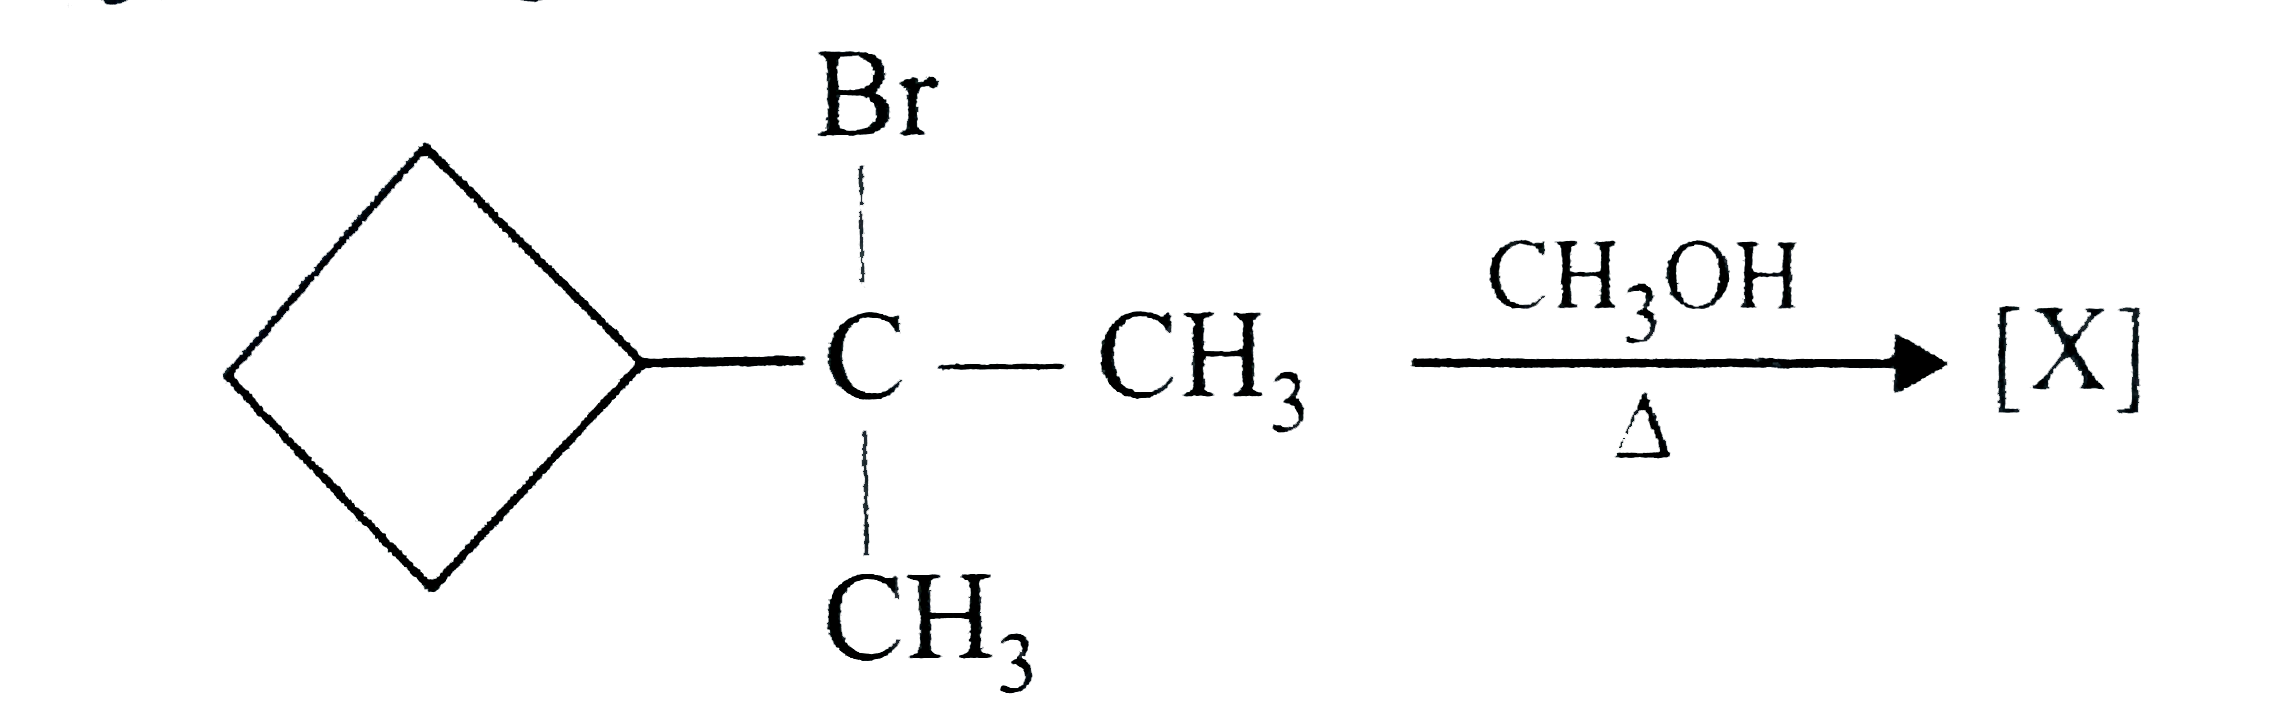 In the given reaction   [X] as the major product among the elimination products is    .